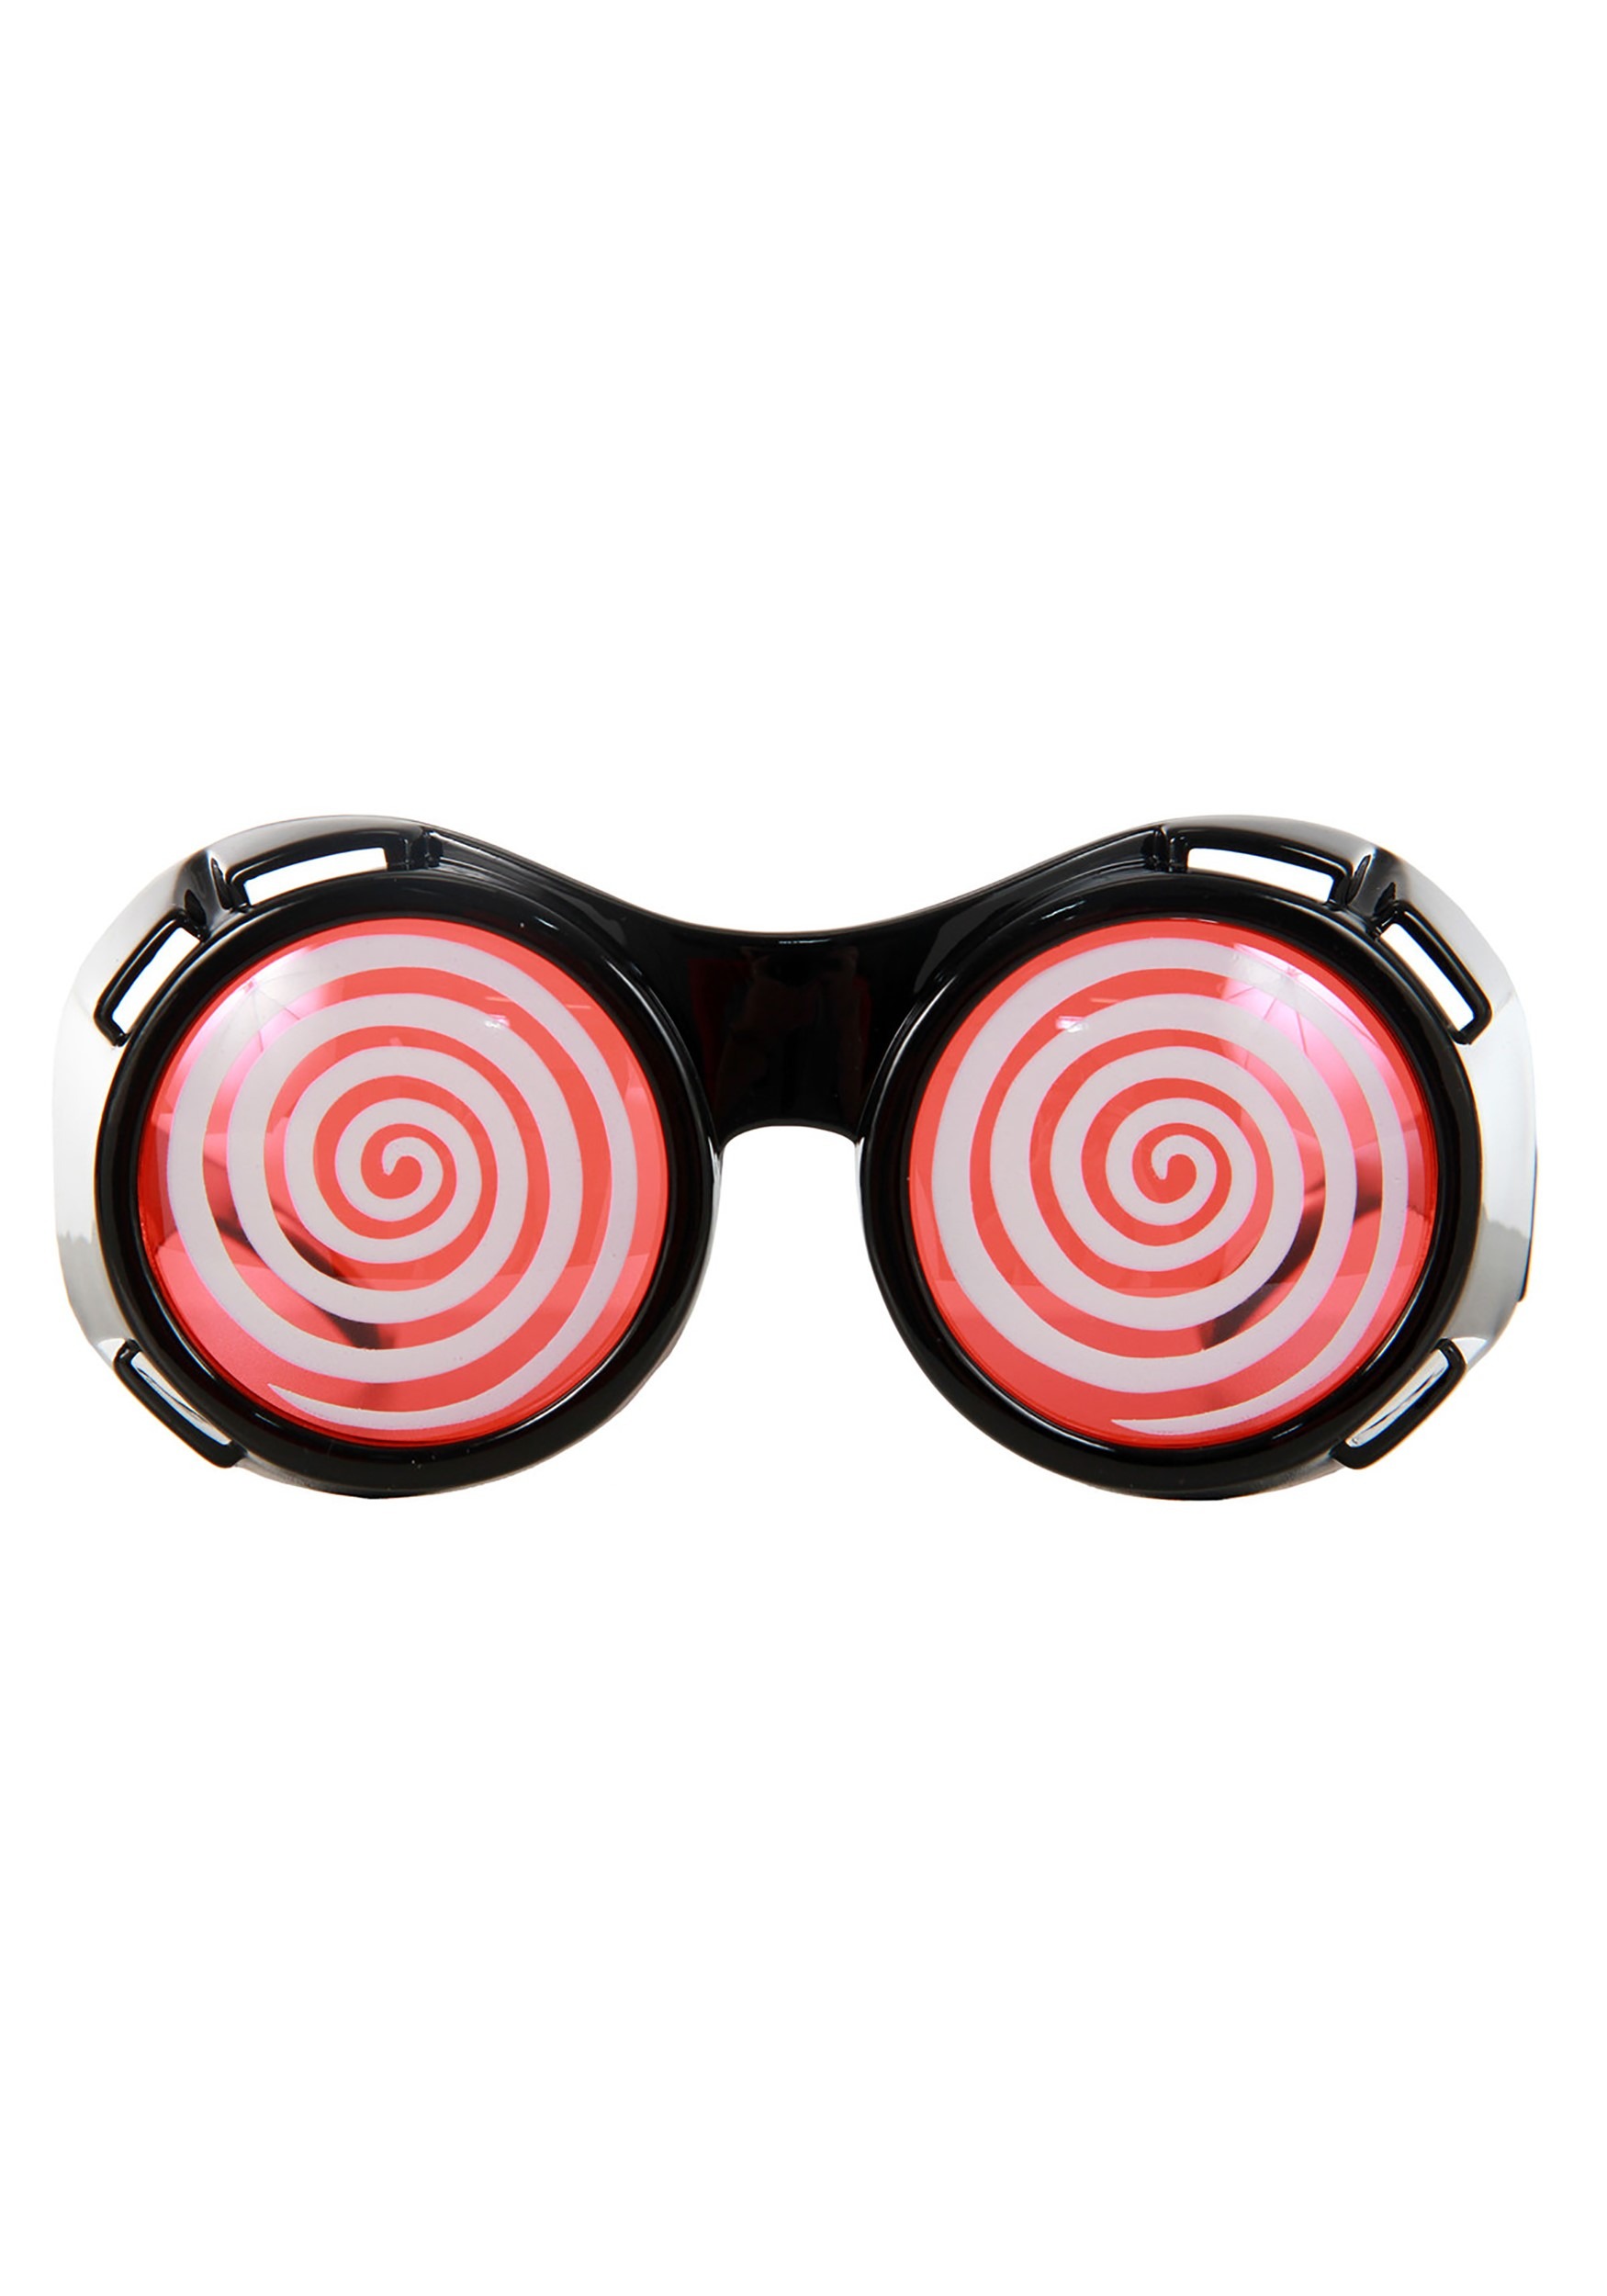 X Ray Goggles Black And Red